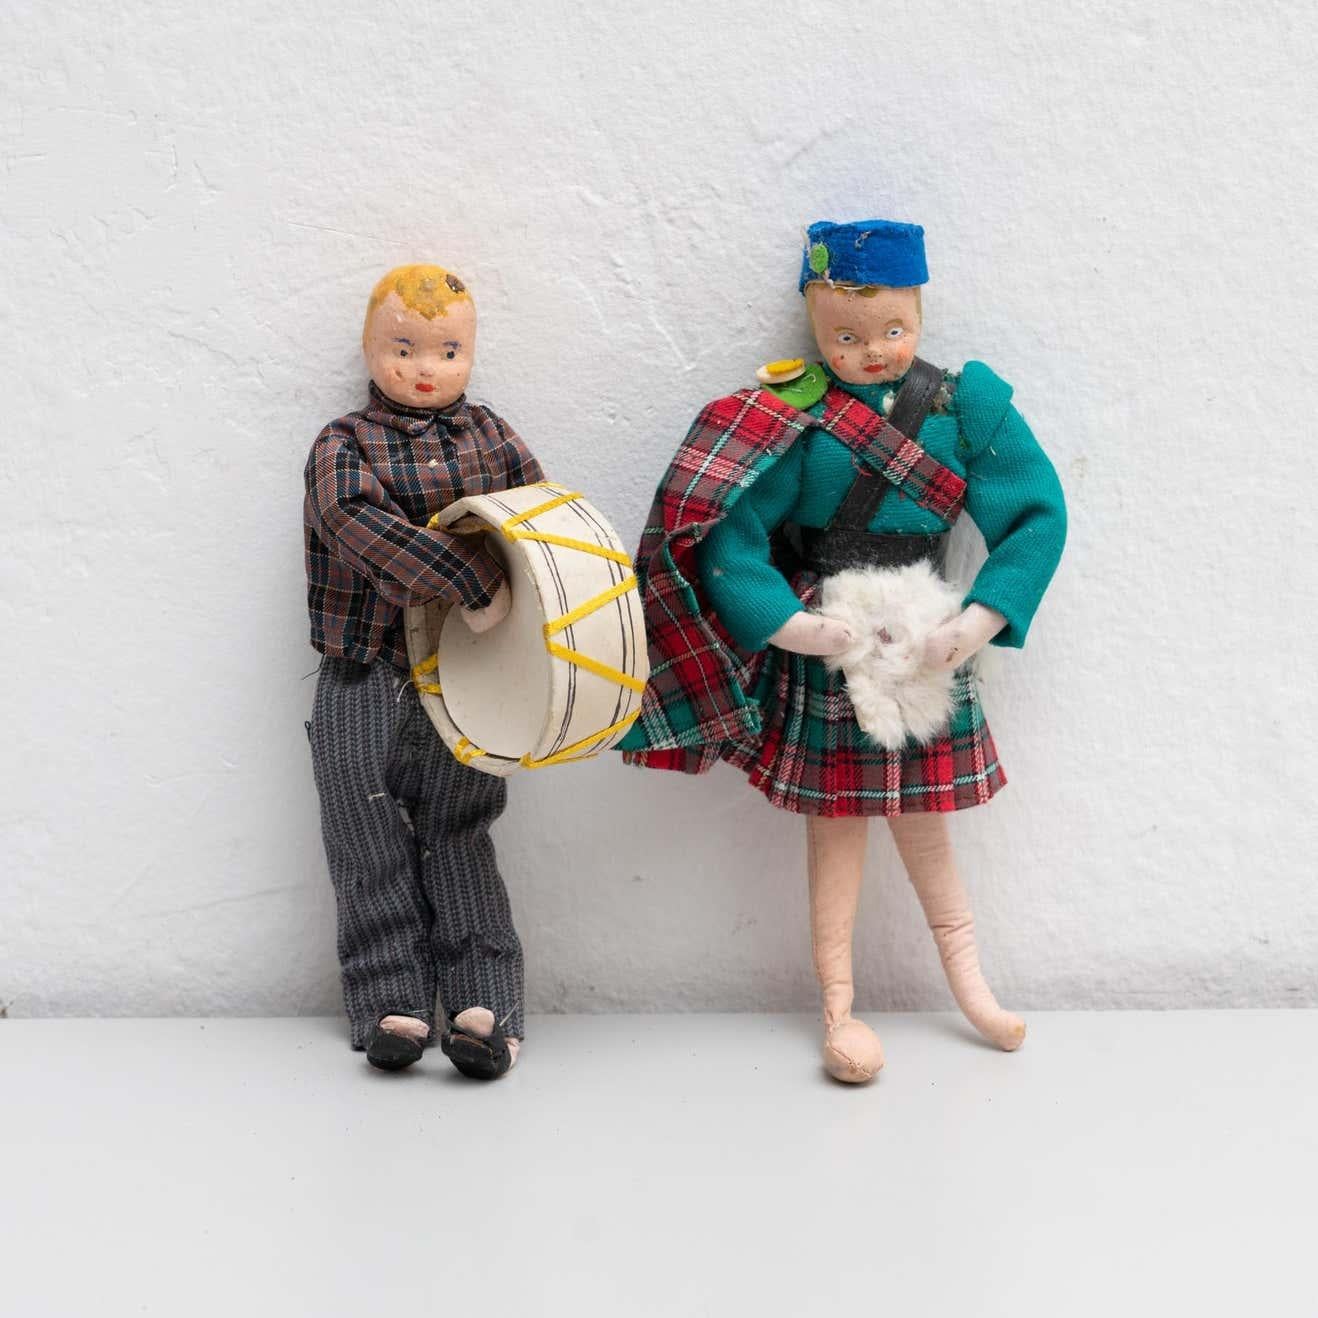 Antique early 20th century hand painted rag doll of two men dressed with folklore costumes. Both dolls present a quilted traditional Scottish garment.

Manufactured circa 1920 in Spain.

In original condition, with minor wear consistent with age and